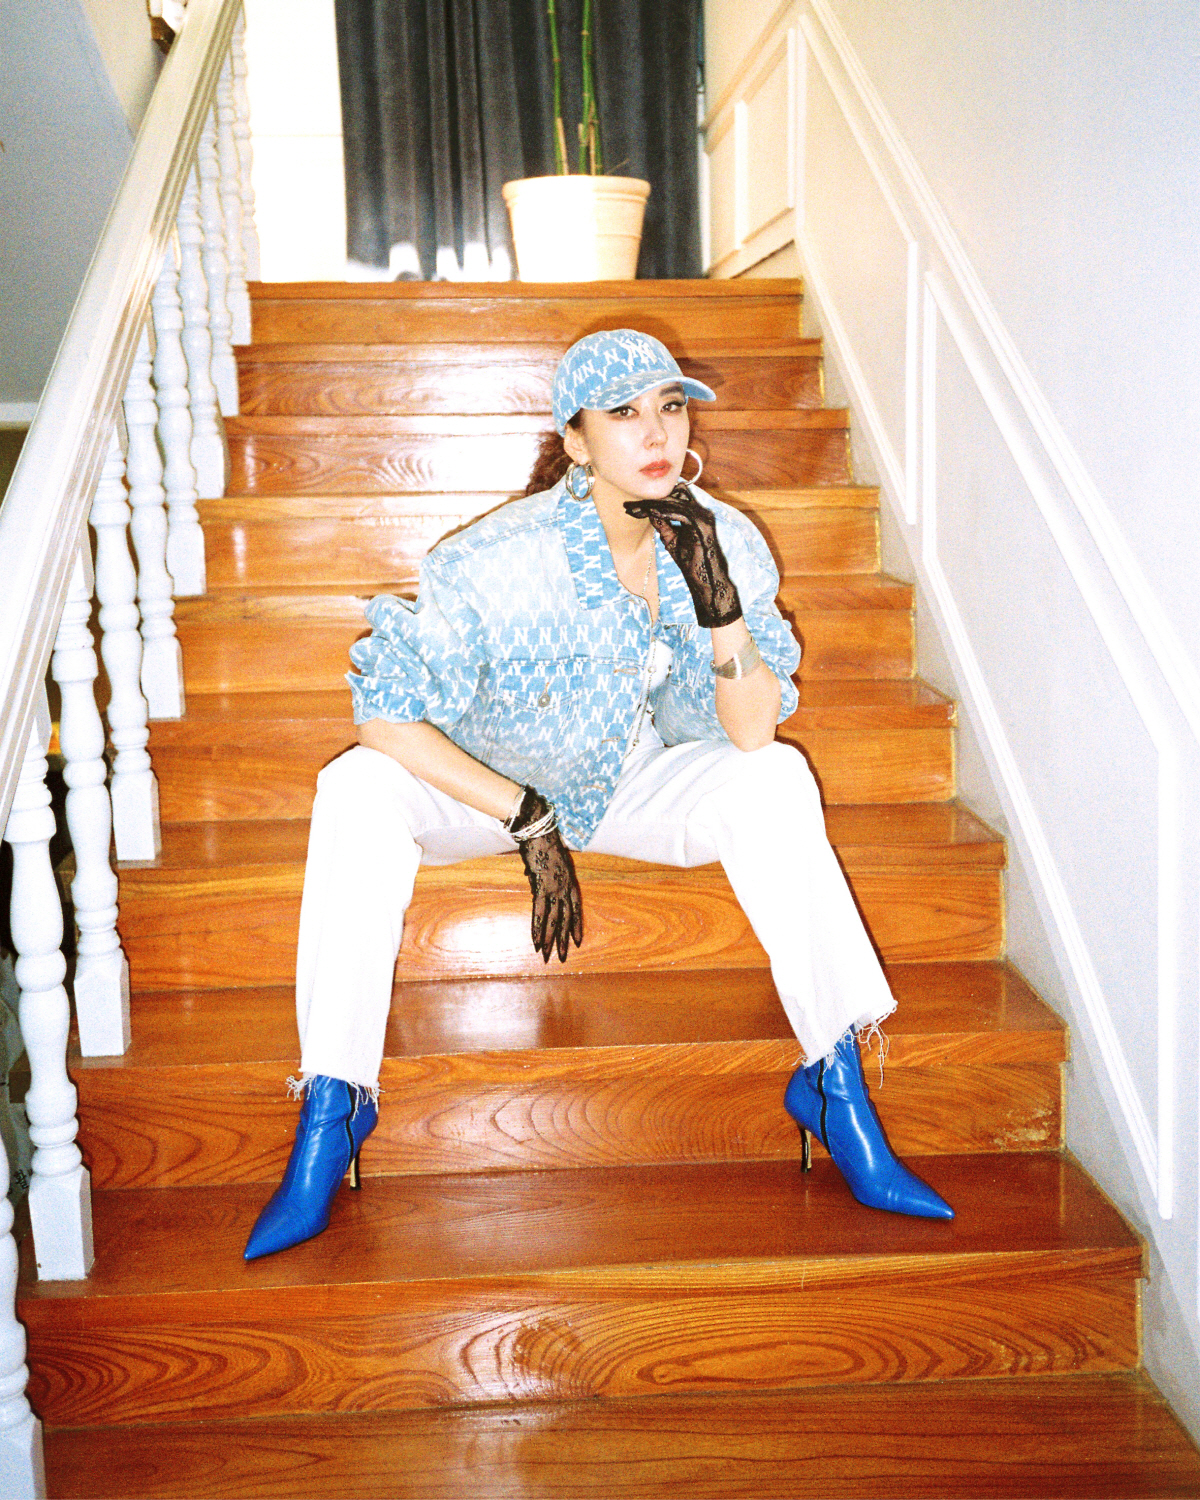 In this picture, which was presented under the concept of Icon of Unchanging Youth, Kim Wan-sun emanated her sophisticated charisma without filtration.Overfit Cheek cloth, jeans, trench coat, ball cap, bucket hat, etc.,I proved that I am Legend, perfecting the retro fashion that came back with a blue-blue fashion.Especially, the old preservatives Beautiful looks have become a hot topic, and some items worn by Kim Wan-sun have already been sold out and are really marching.Especially, the netizens who watched the music video of the 2020 version The Dance in the Rhythm which was first released with this picture are Kim Wan-sun is completely hip and twintiesOr?  This Sister is not old and still, vampires beautiful look!  God perfect!Yang Jun-il and Top Goal Fashion Two Towers, I miss that time, and other reviews of Kim Wan-sun are continuing to be posted on various YouTube channels preferred by teenagers to 50s and older.On this day, Kim Wan-sun overwhelmed the atmosphere with charismatic eyes, sophisticatedly digesting all the concepts, and gave the staff a sense of elasticity, and it was a back door that enjoyed the whole shooting with free expression and pose.According to an MLB official, Nutros Kim Wan-sun picture, which reinterpreted the content more than 30 years ago, is getting a hot response from all ages, recalling memories for the millennial generation and the generations that have spent the era with Kim Wan-sun.In the coming spring, I suggest you enjoy retro items with MLB Denim.Meanwhile, the MLBDenim collection has also released Cheek cloth, short pants, hats, etc. in MLB Kids aimed at Eight Pocket Golden Kids. Kim Wan-suns more pictures and Dancing in the Rhythm 2020 version of the music video can be found on MLBs official online mall and Instagram.